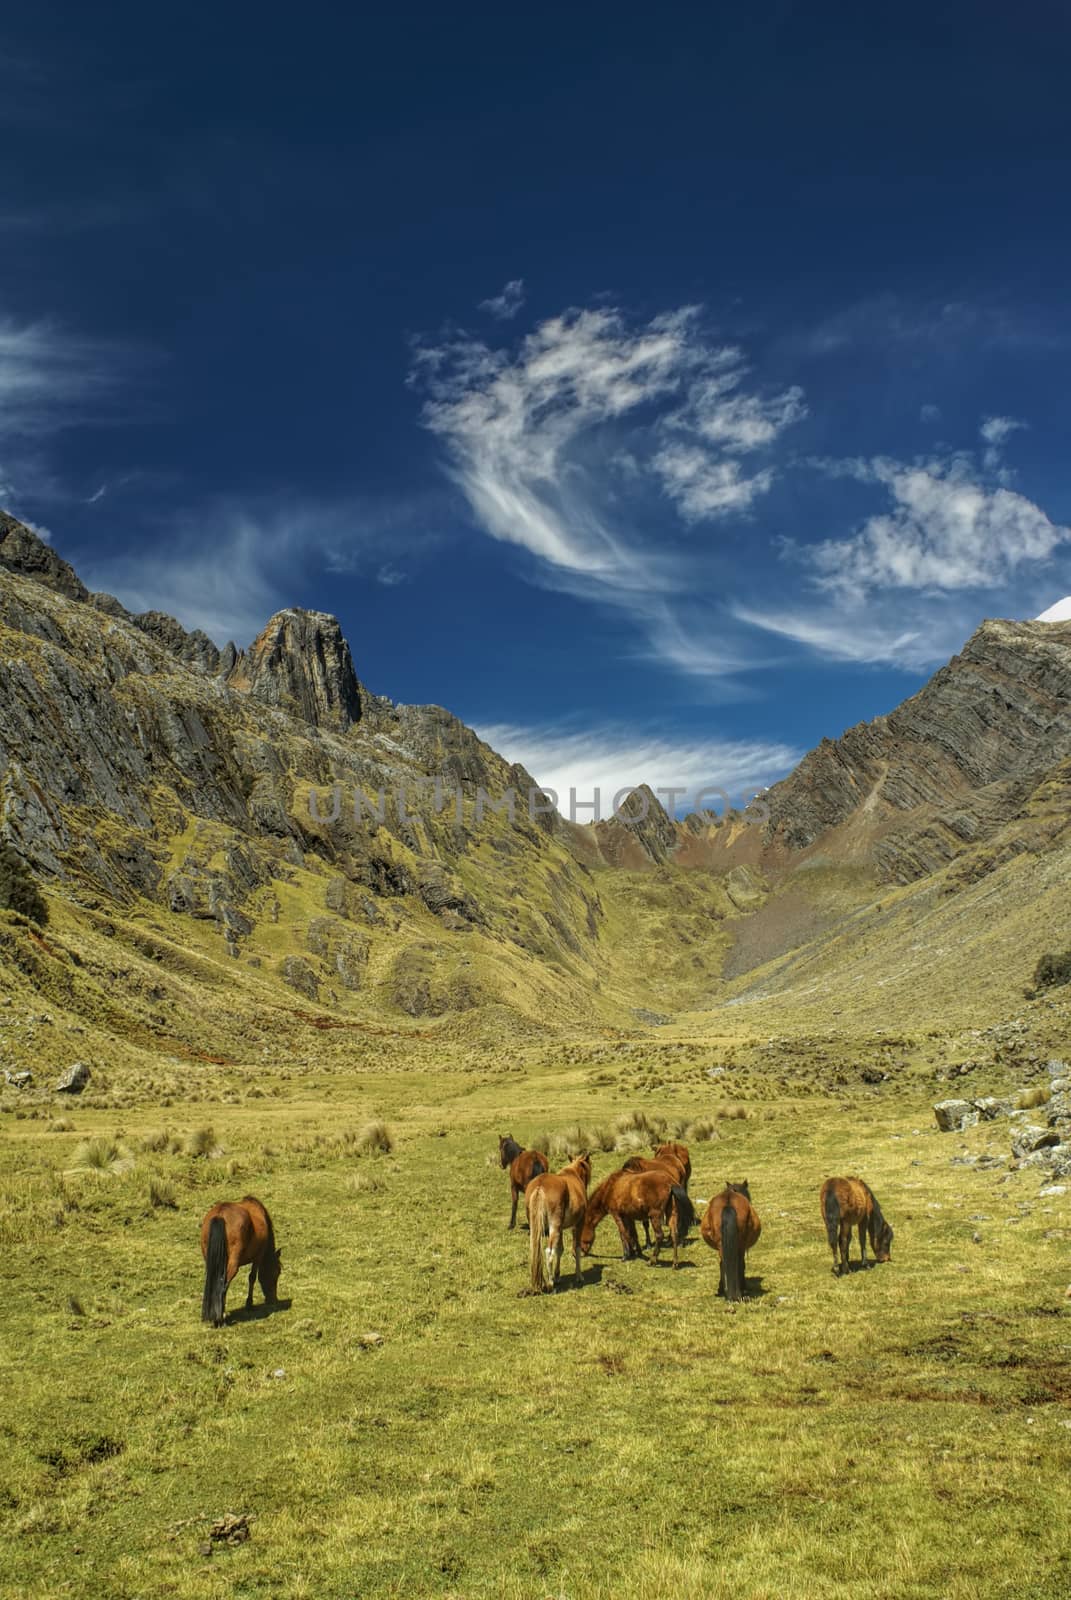 Horses grazing in scenic green valley between high mountain peaks in Peruvian Andes